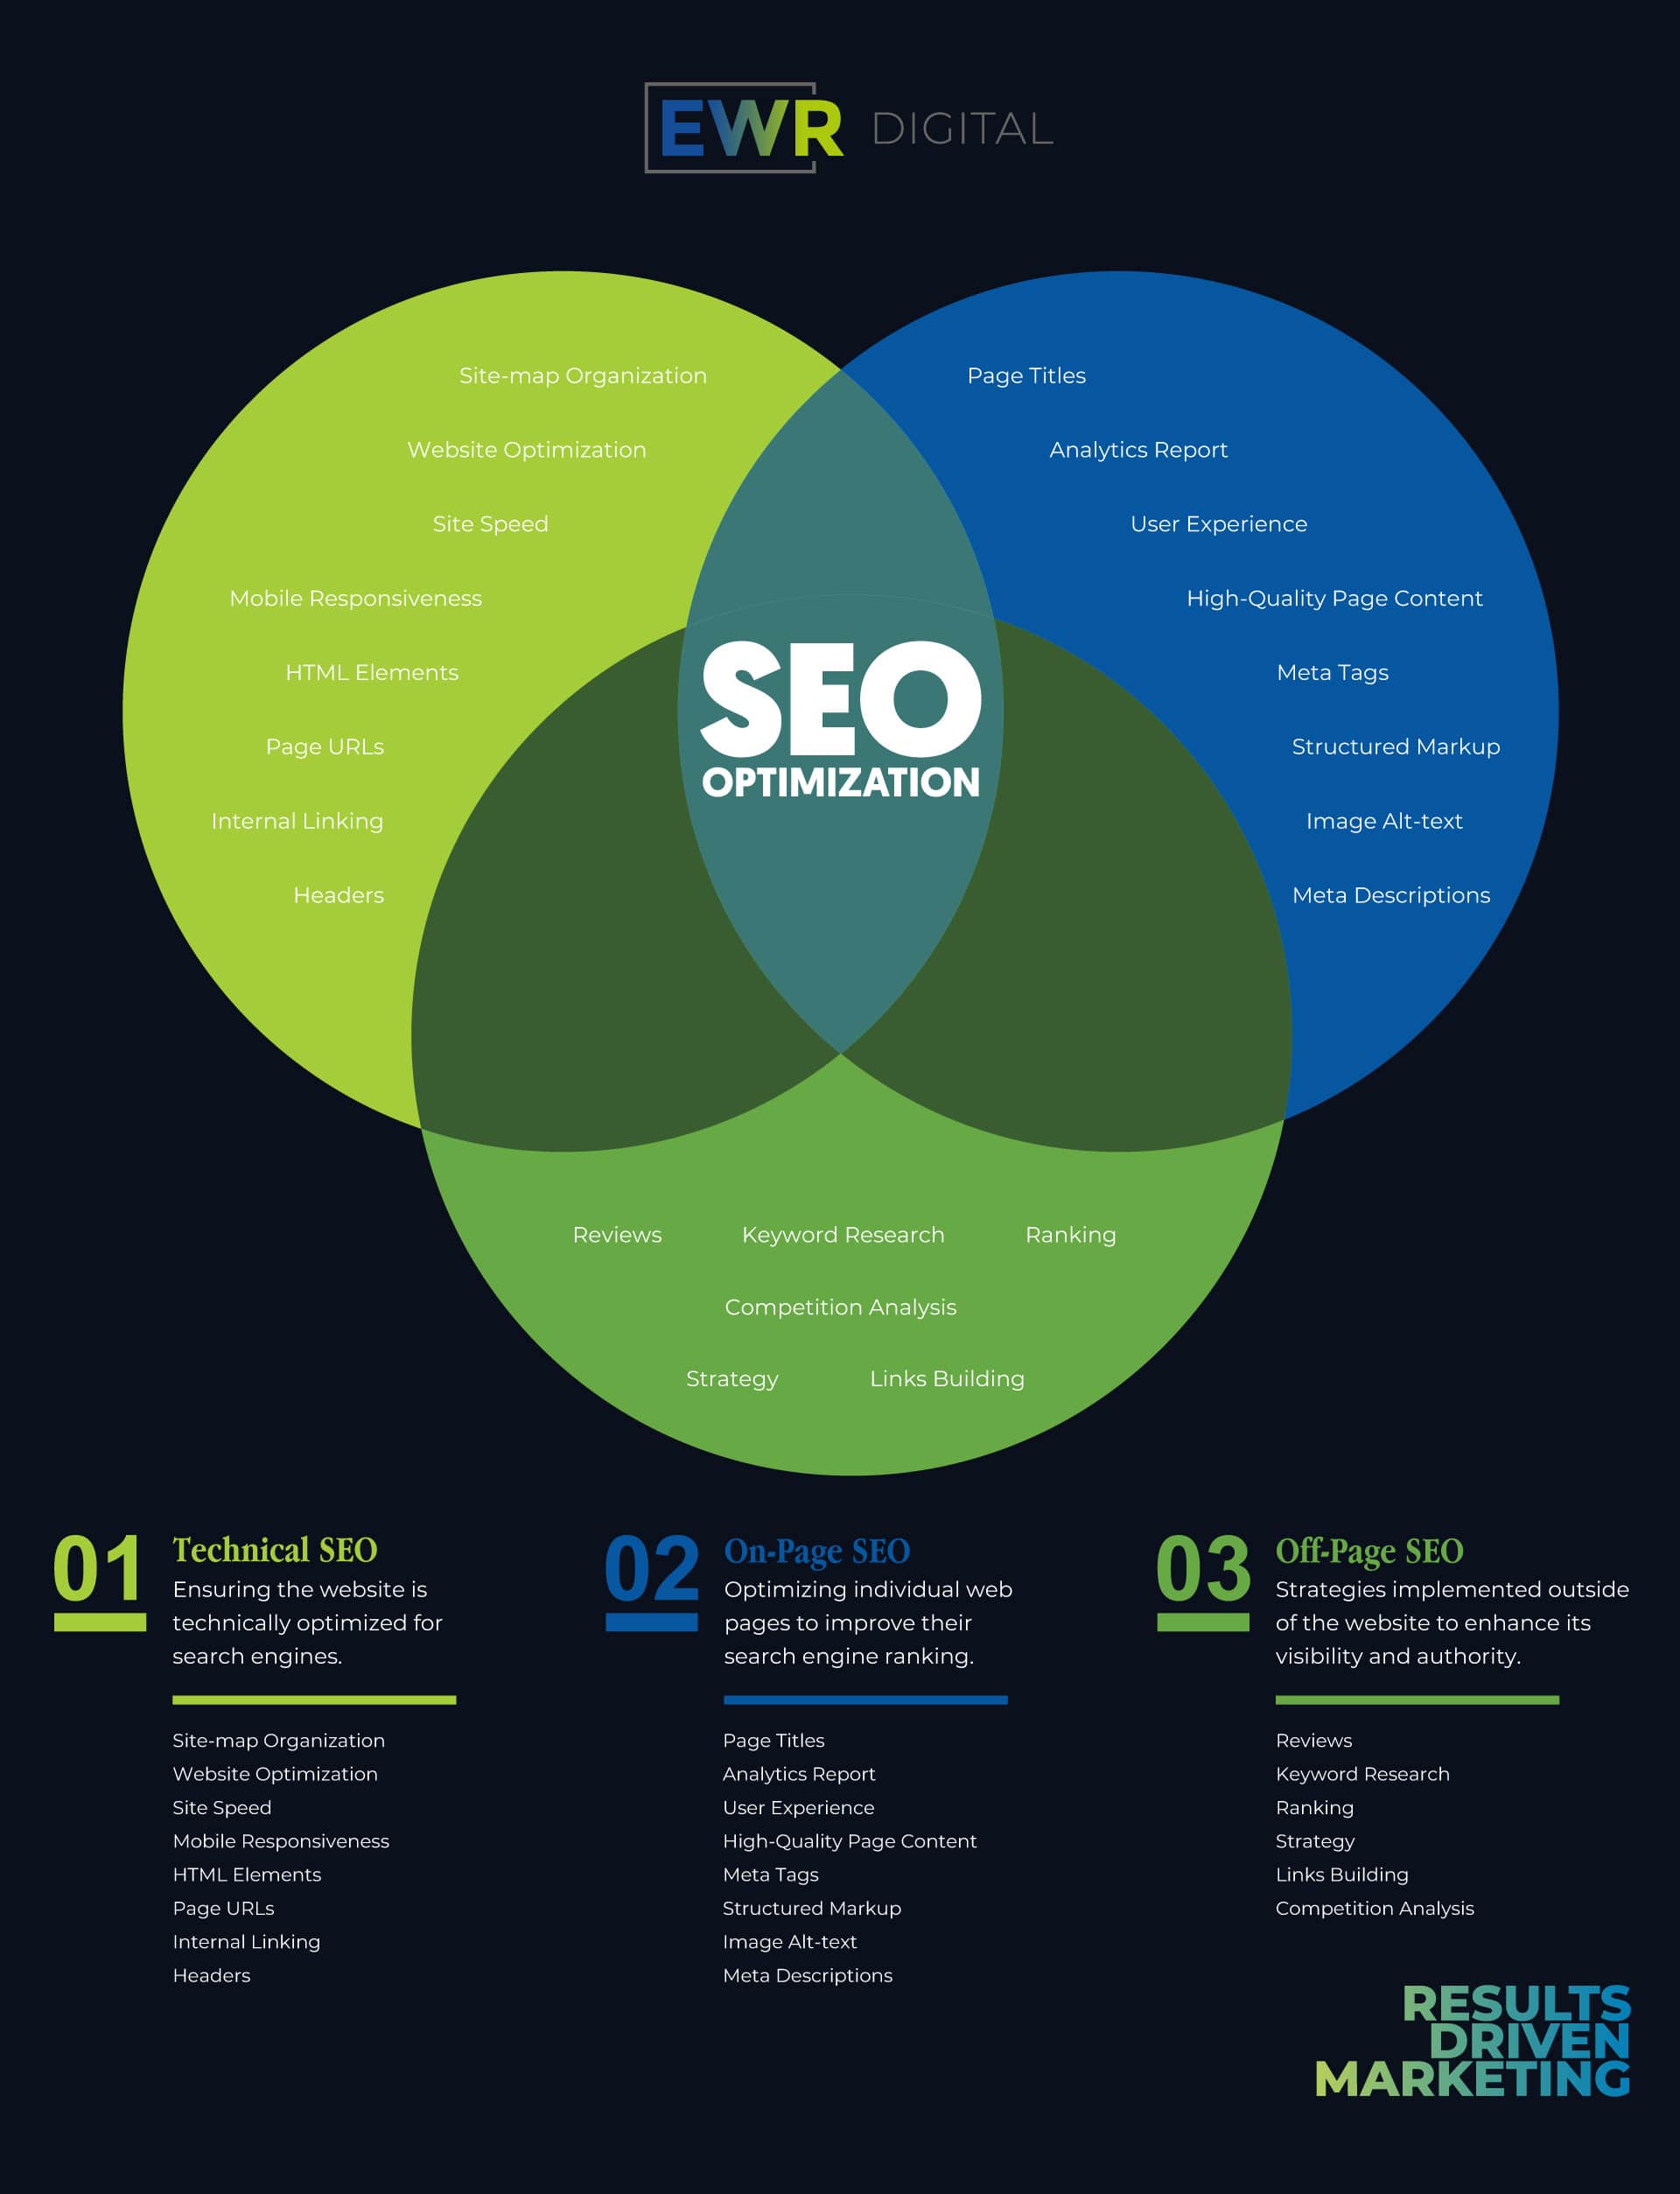 A Venn diagram depicting the overlap of Technical SEO, On page SEO, and Off page SEO components, showcasing the holistic nature of search engine optimization.